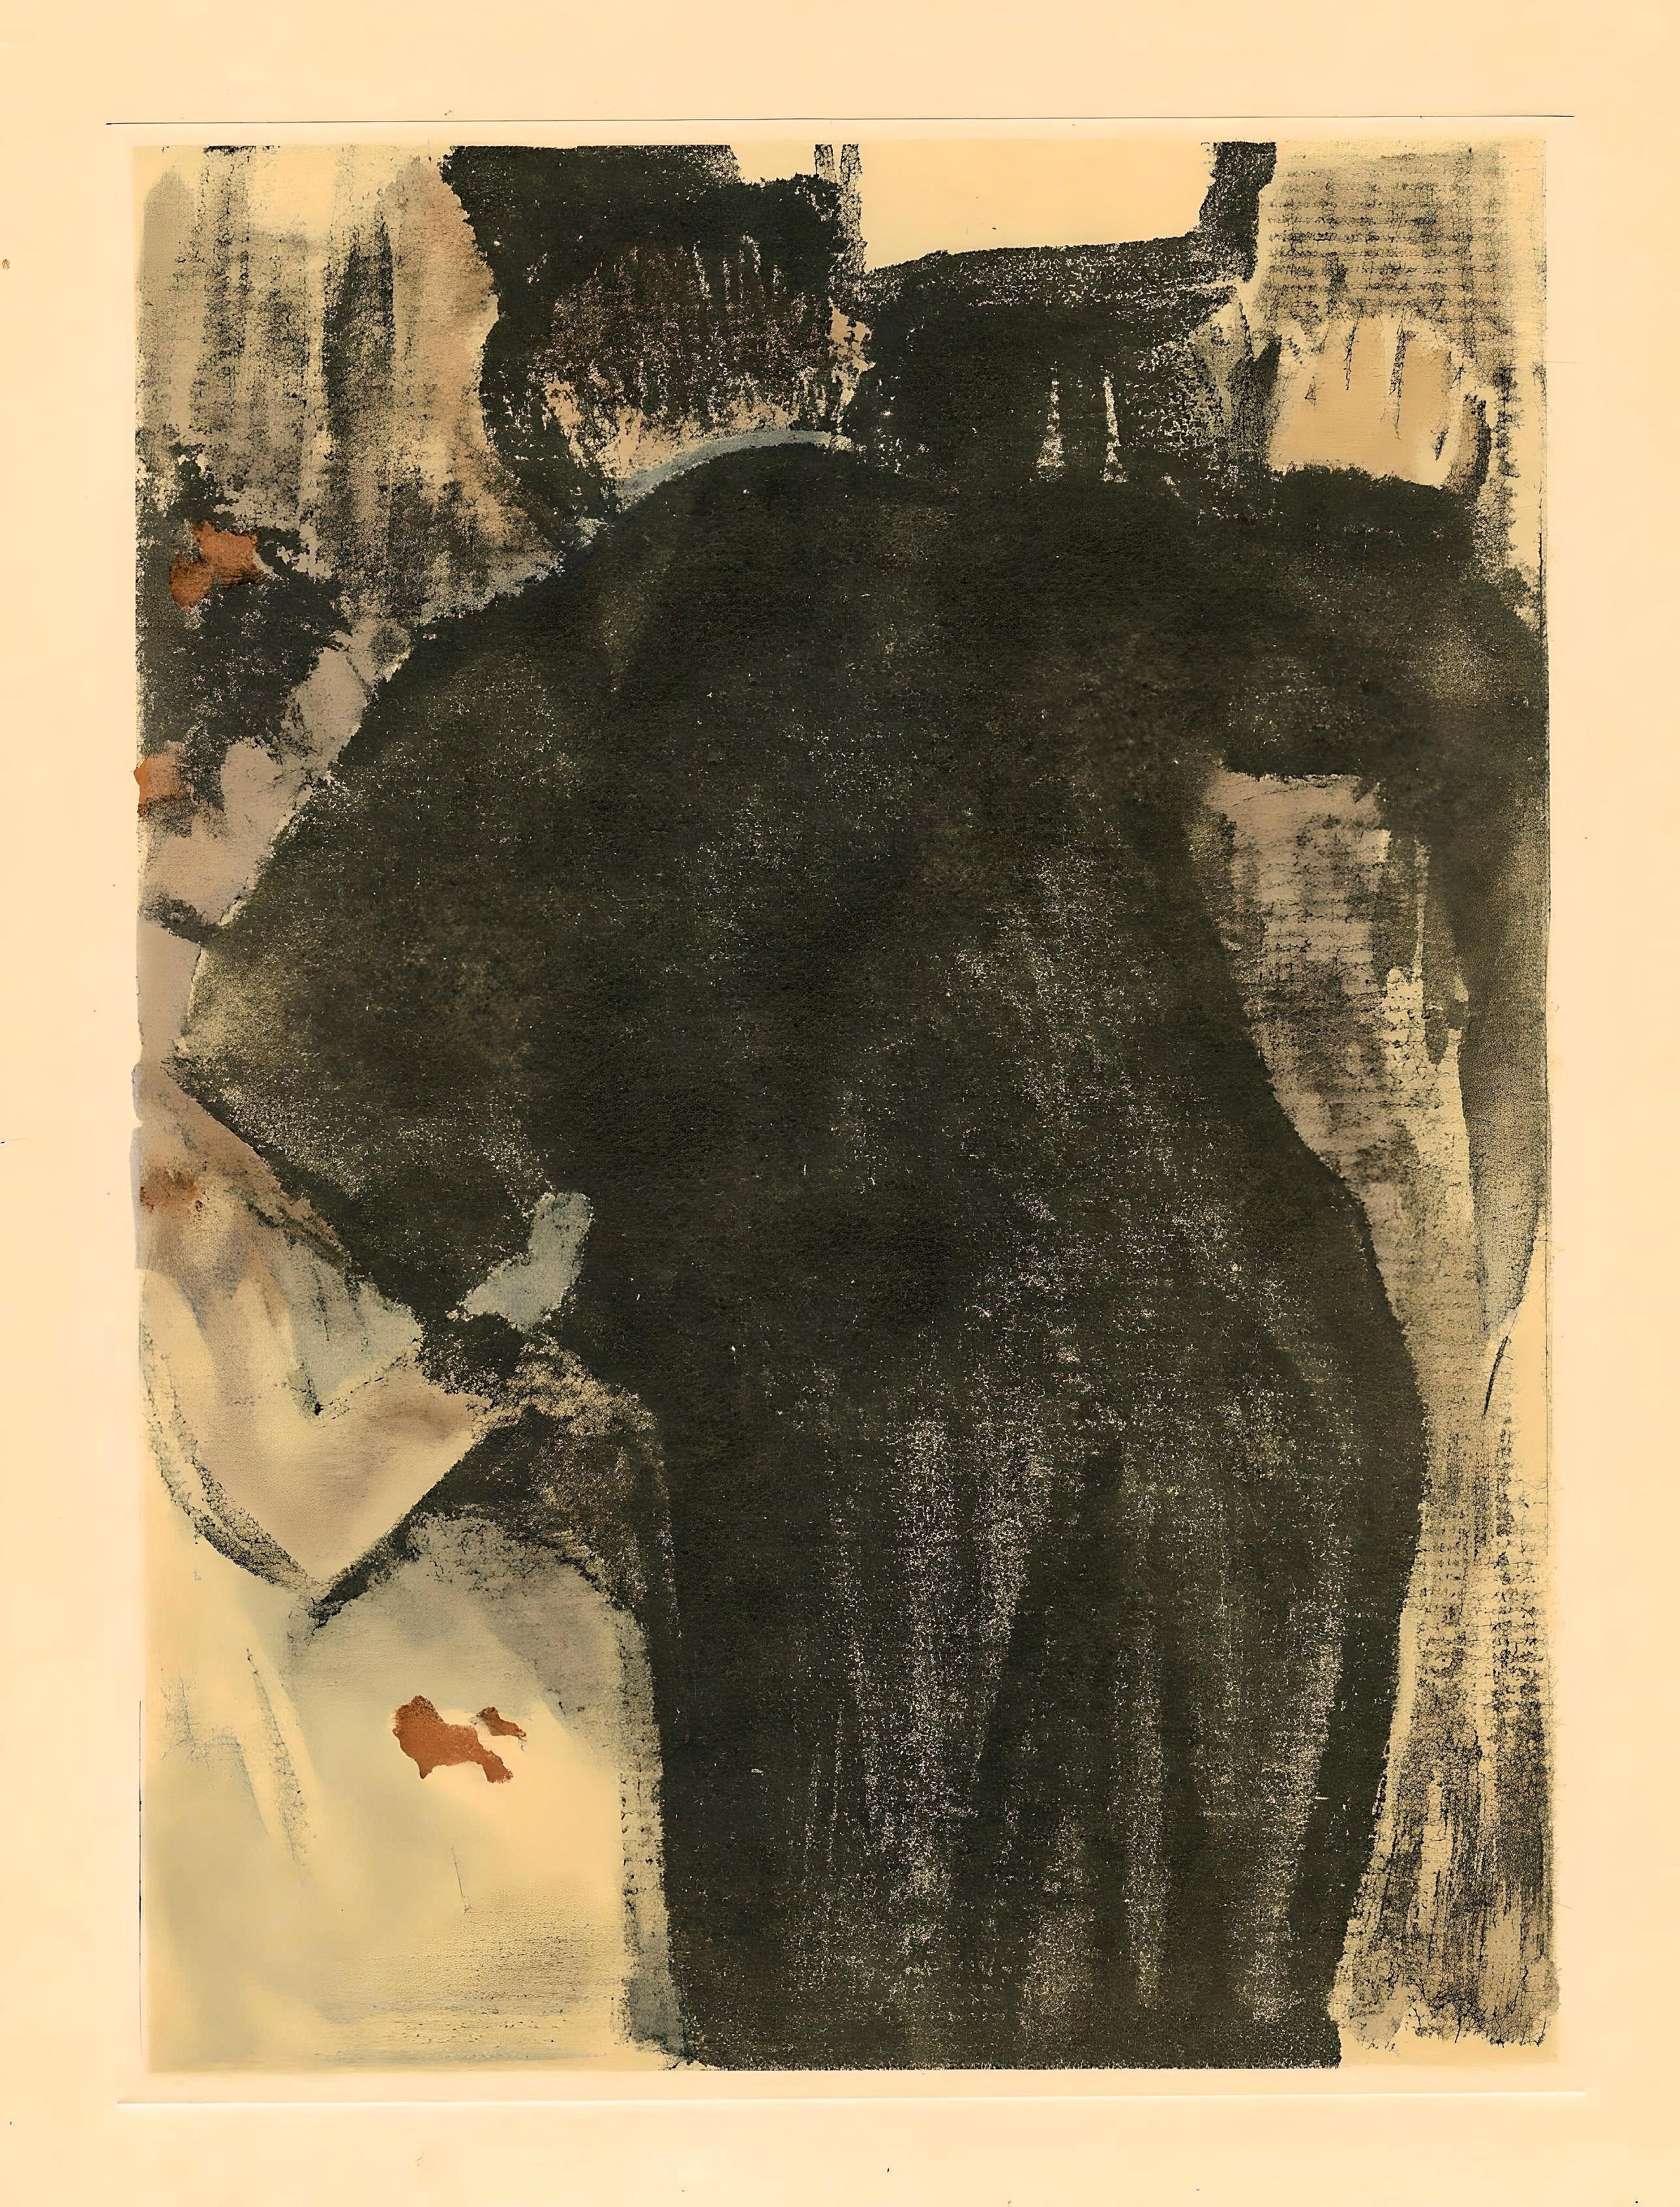 Engraving on Marais vélin paper. Unsigned and unnumbered, as issued. Good Condition; never framed or matted. Notes: From the volume, E. Degas Les Monotypes, 1948. Published by Quatre Chemins-Editart, Paris; printed by Les Ateliers G. Bouan, and